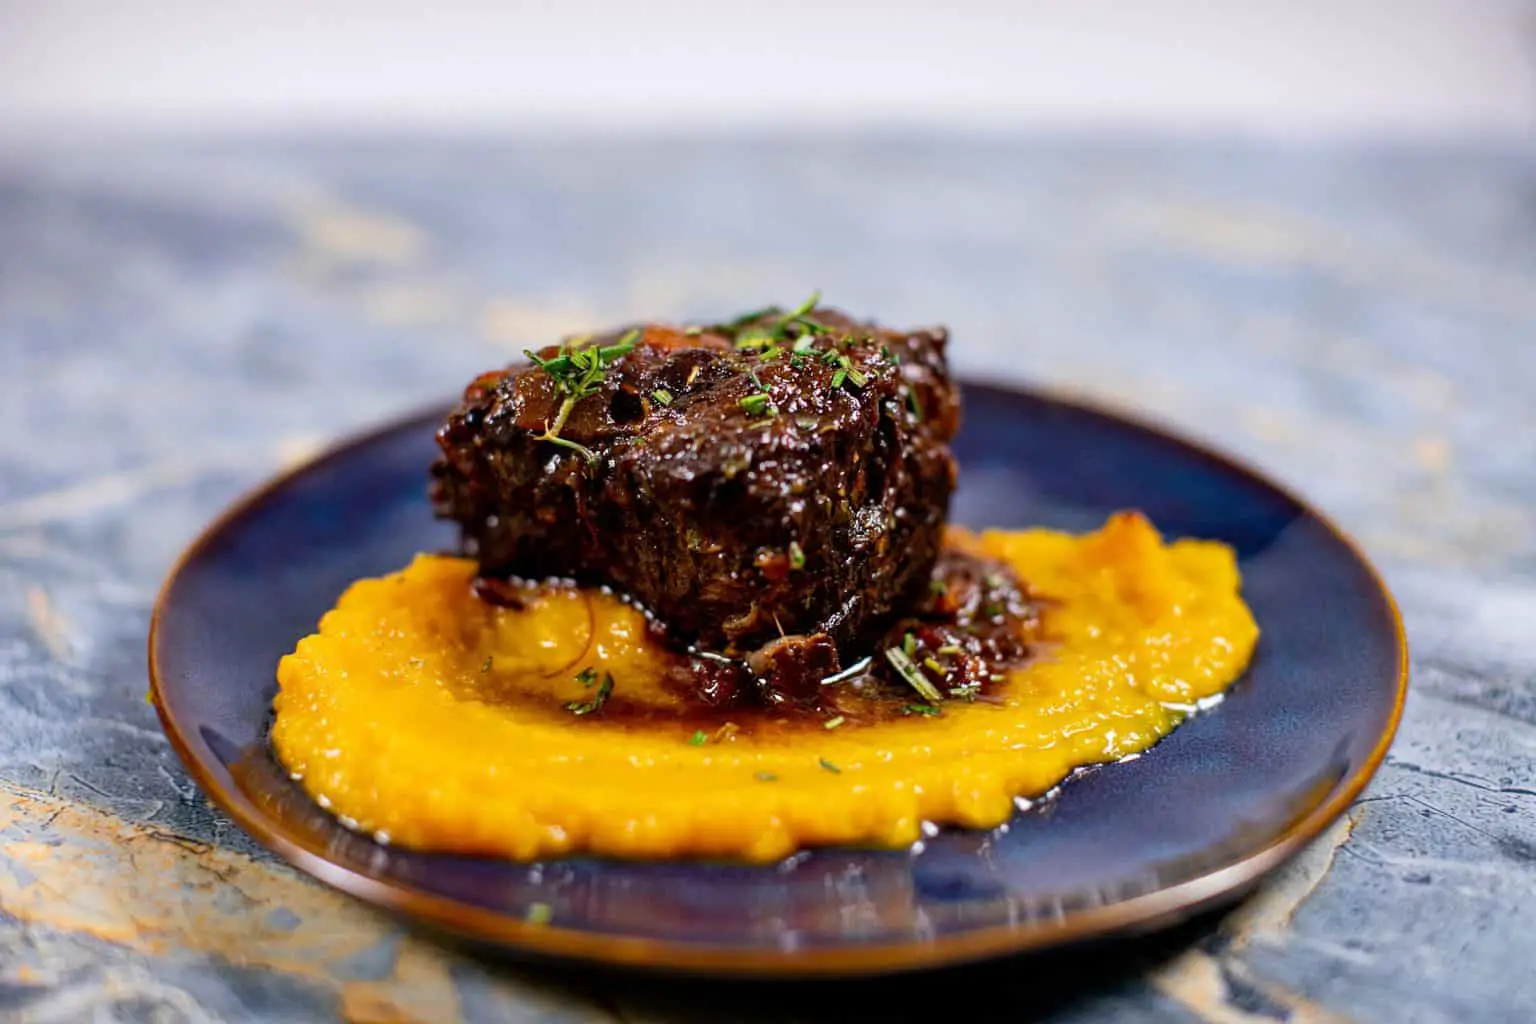 Prepared butternut squash puree recipe with braised meat on a plate